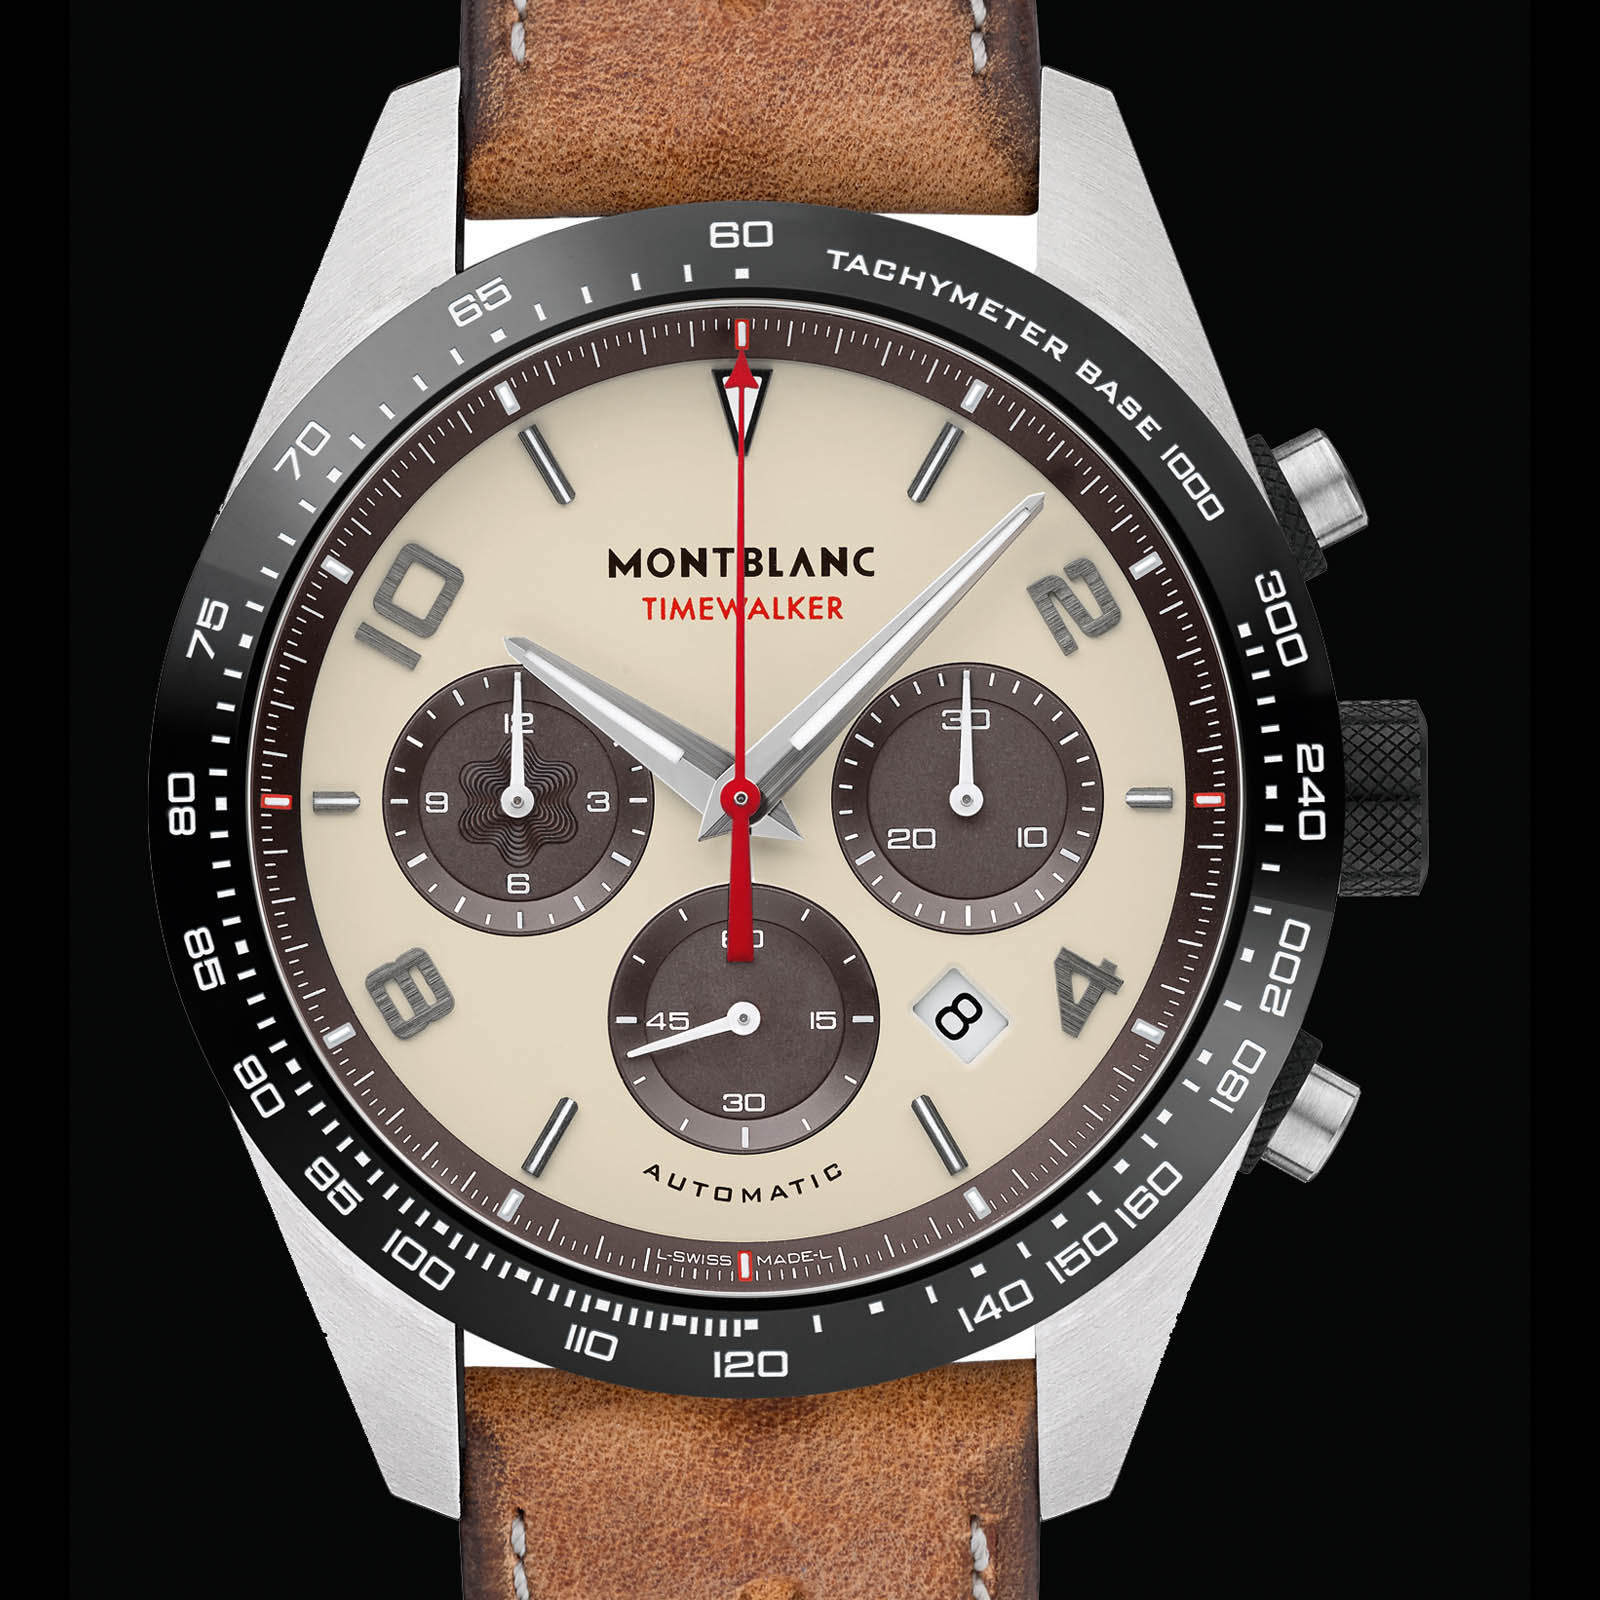 Montblanc TimeWalker Manufacture Chronograph Cappuccino edition